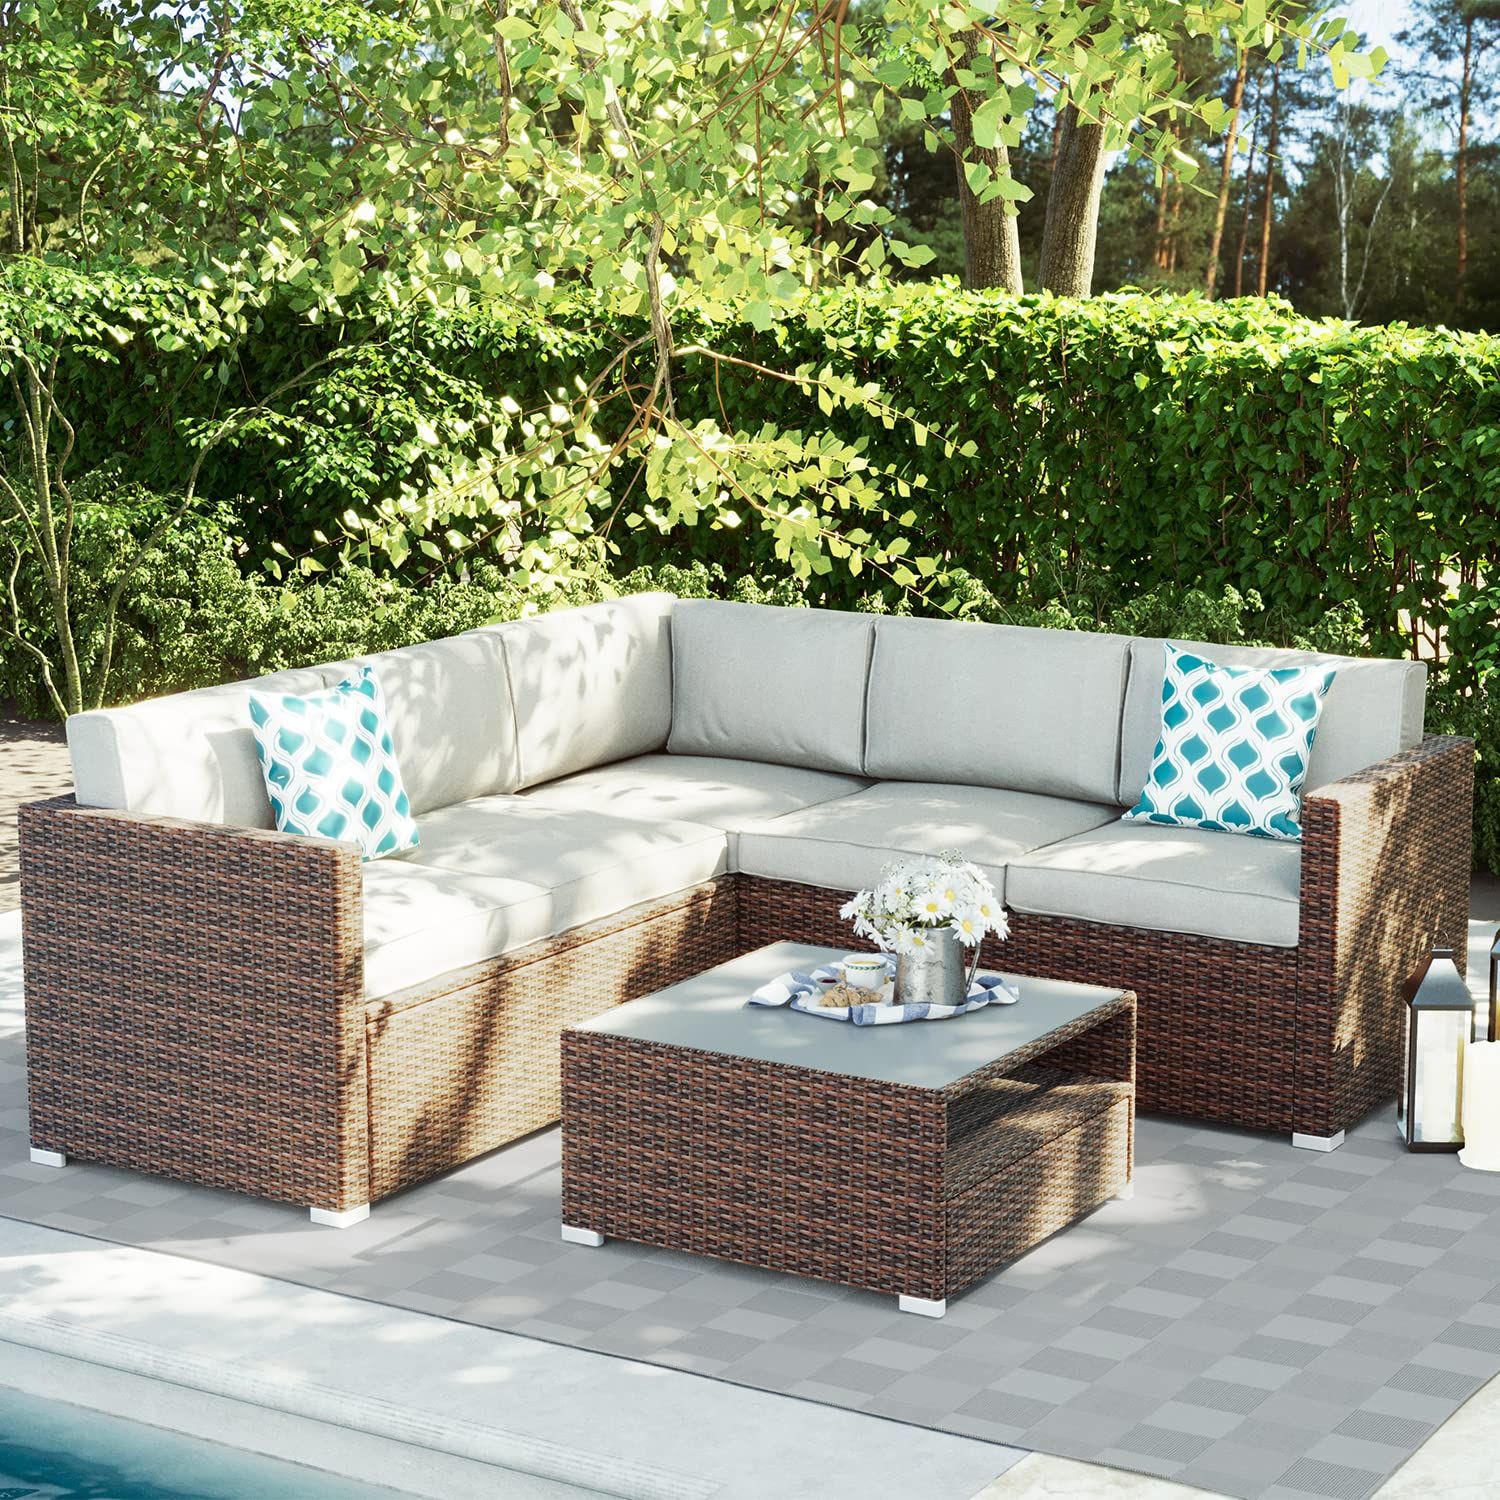 The Appeal of Outdoor Sectional Furniture